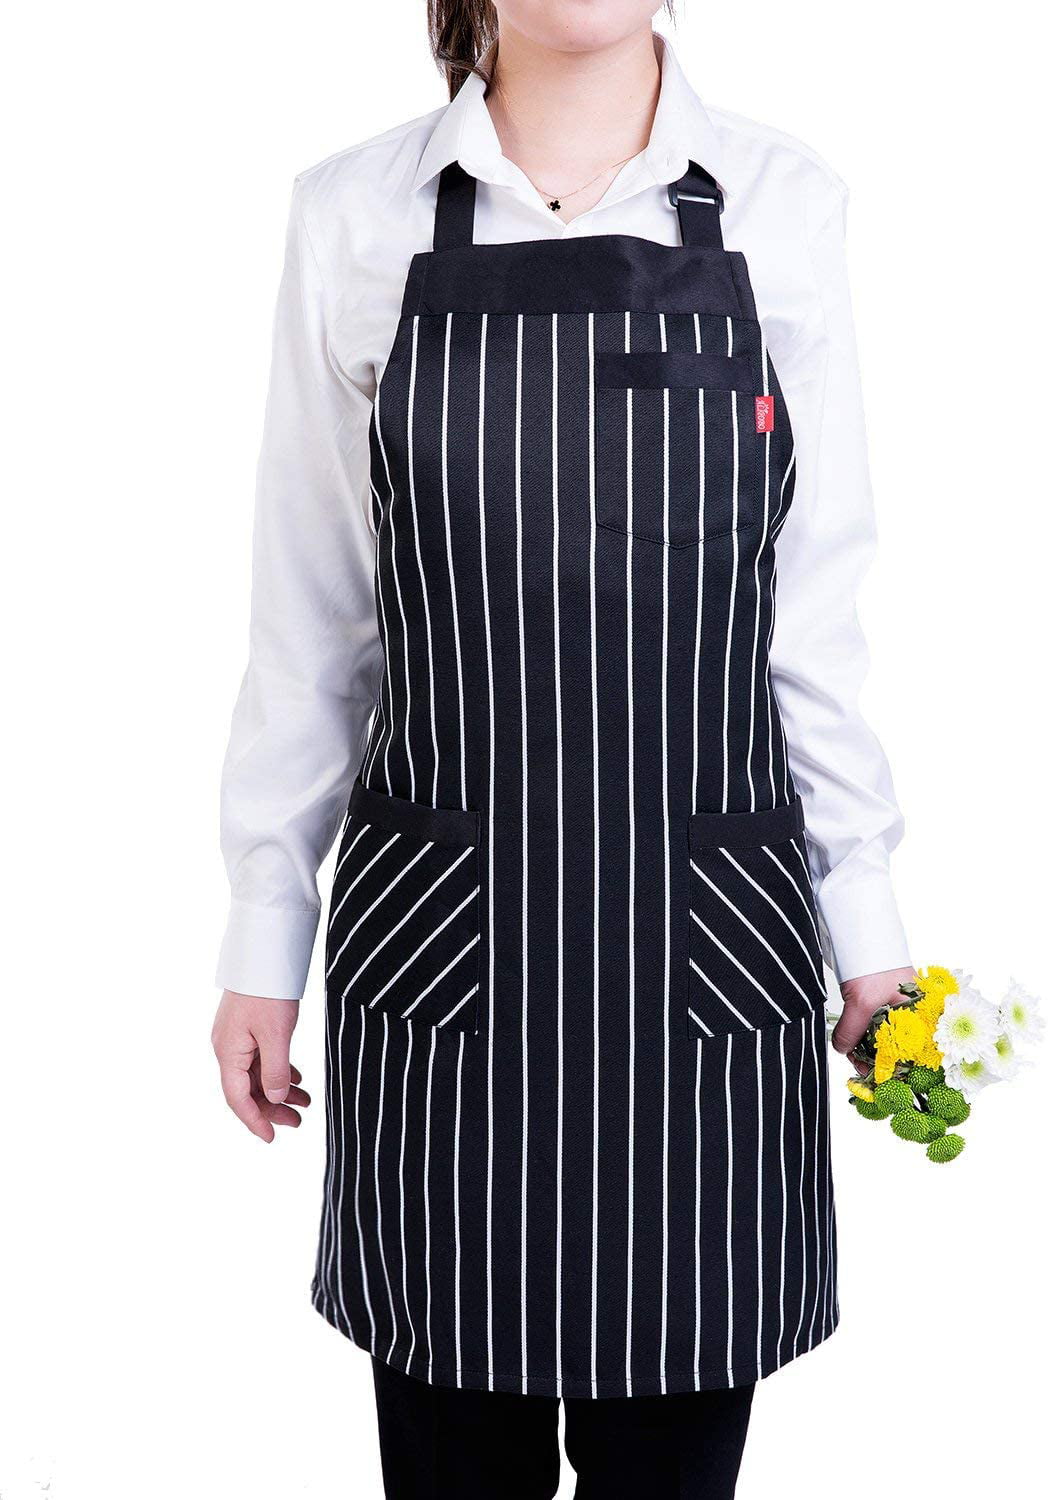 Alipobo Aprons For Women And Men Kitchen Chef Apron With 3 Pockets And 40" Long 